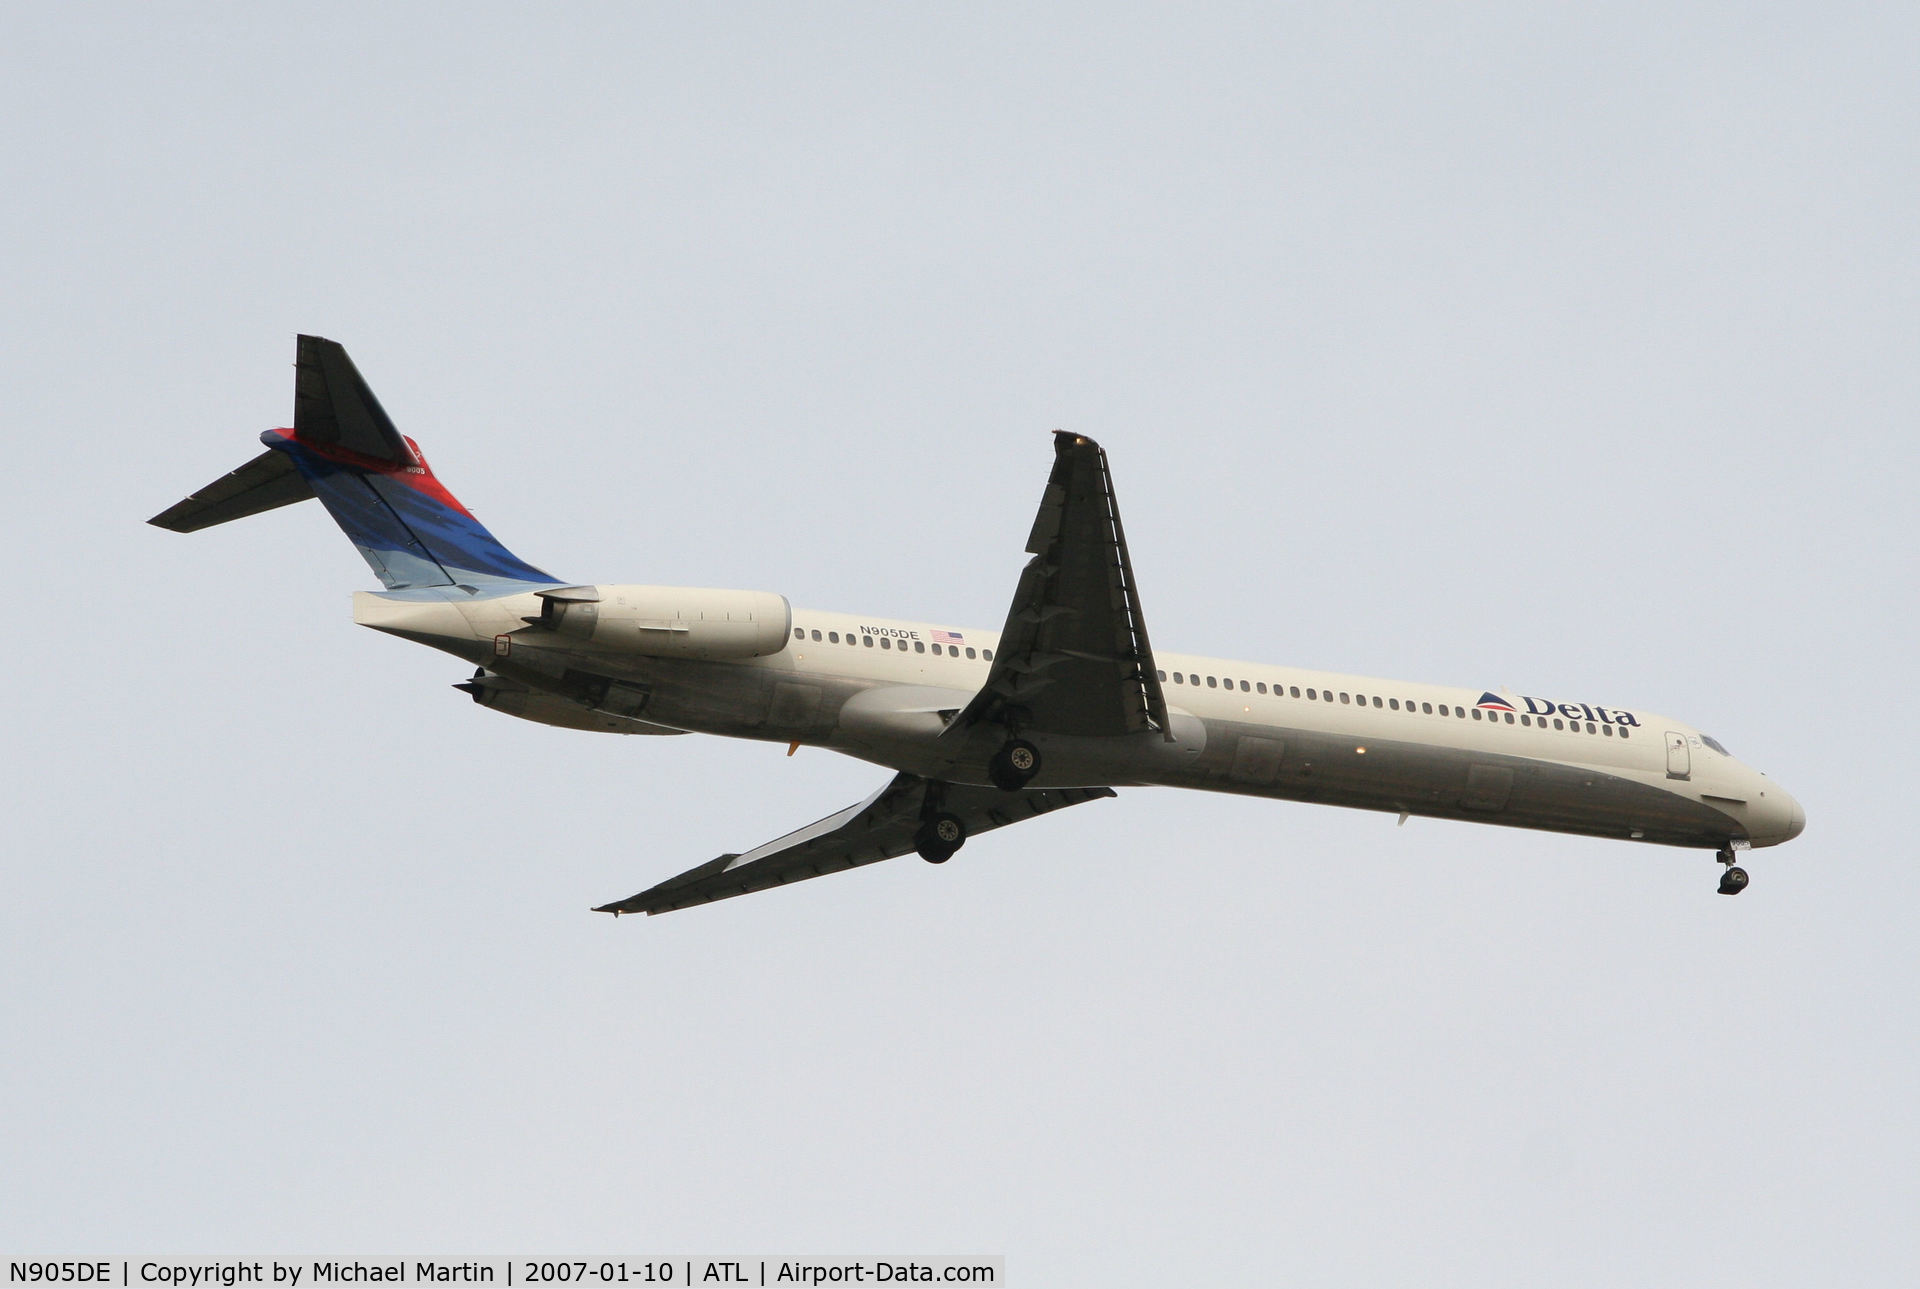 N905DE, 1992 McDonnell Douglas MD-88 C/N 53410, Over the numbers of 9R